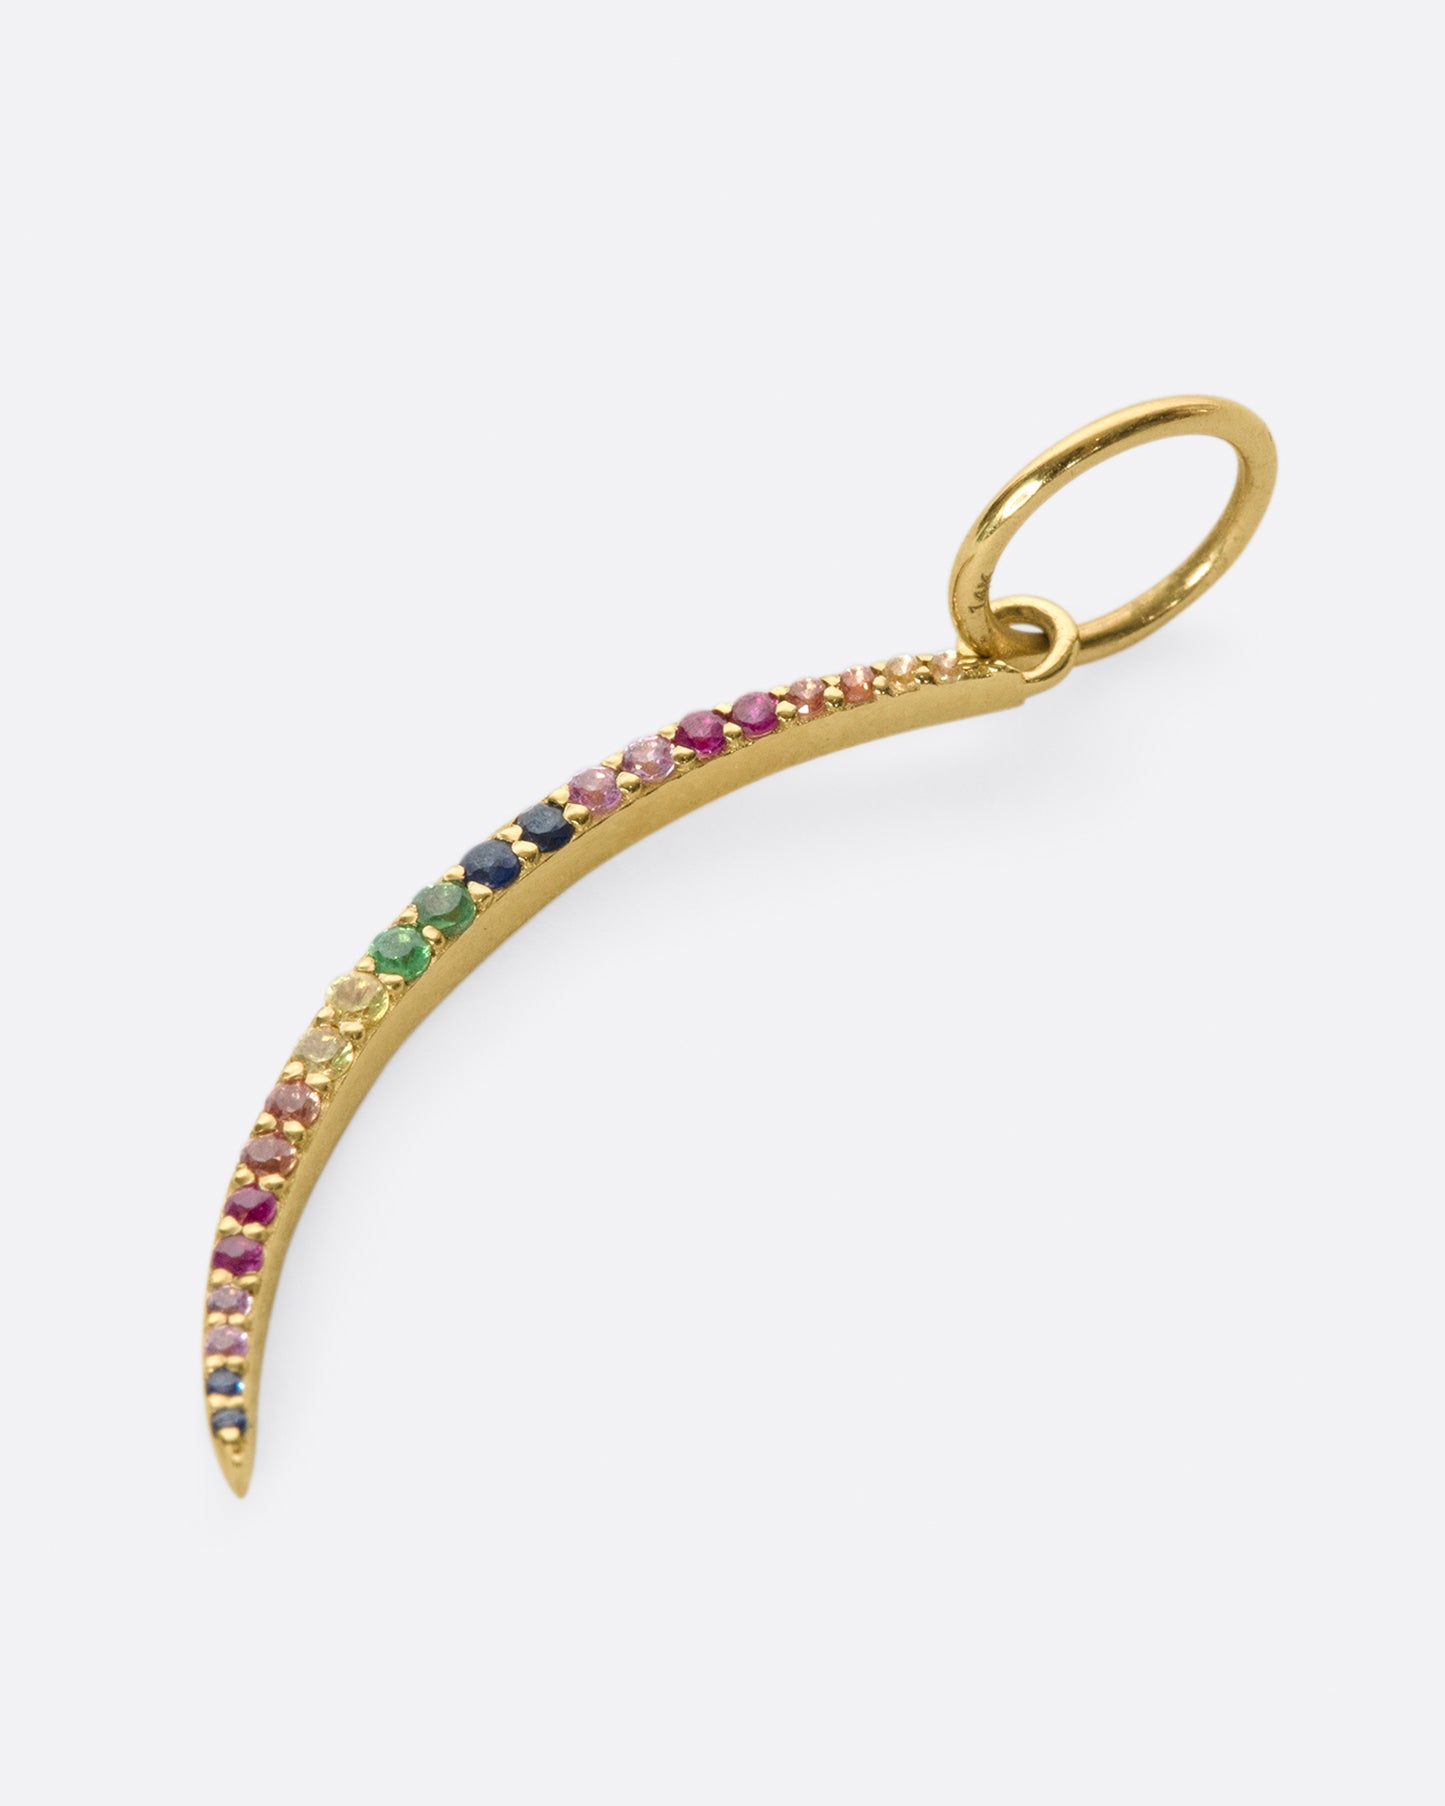 A curved, elongated gold sliver lined with rainbow sapphires. The length of this dangle makes it great for layering.